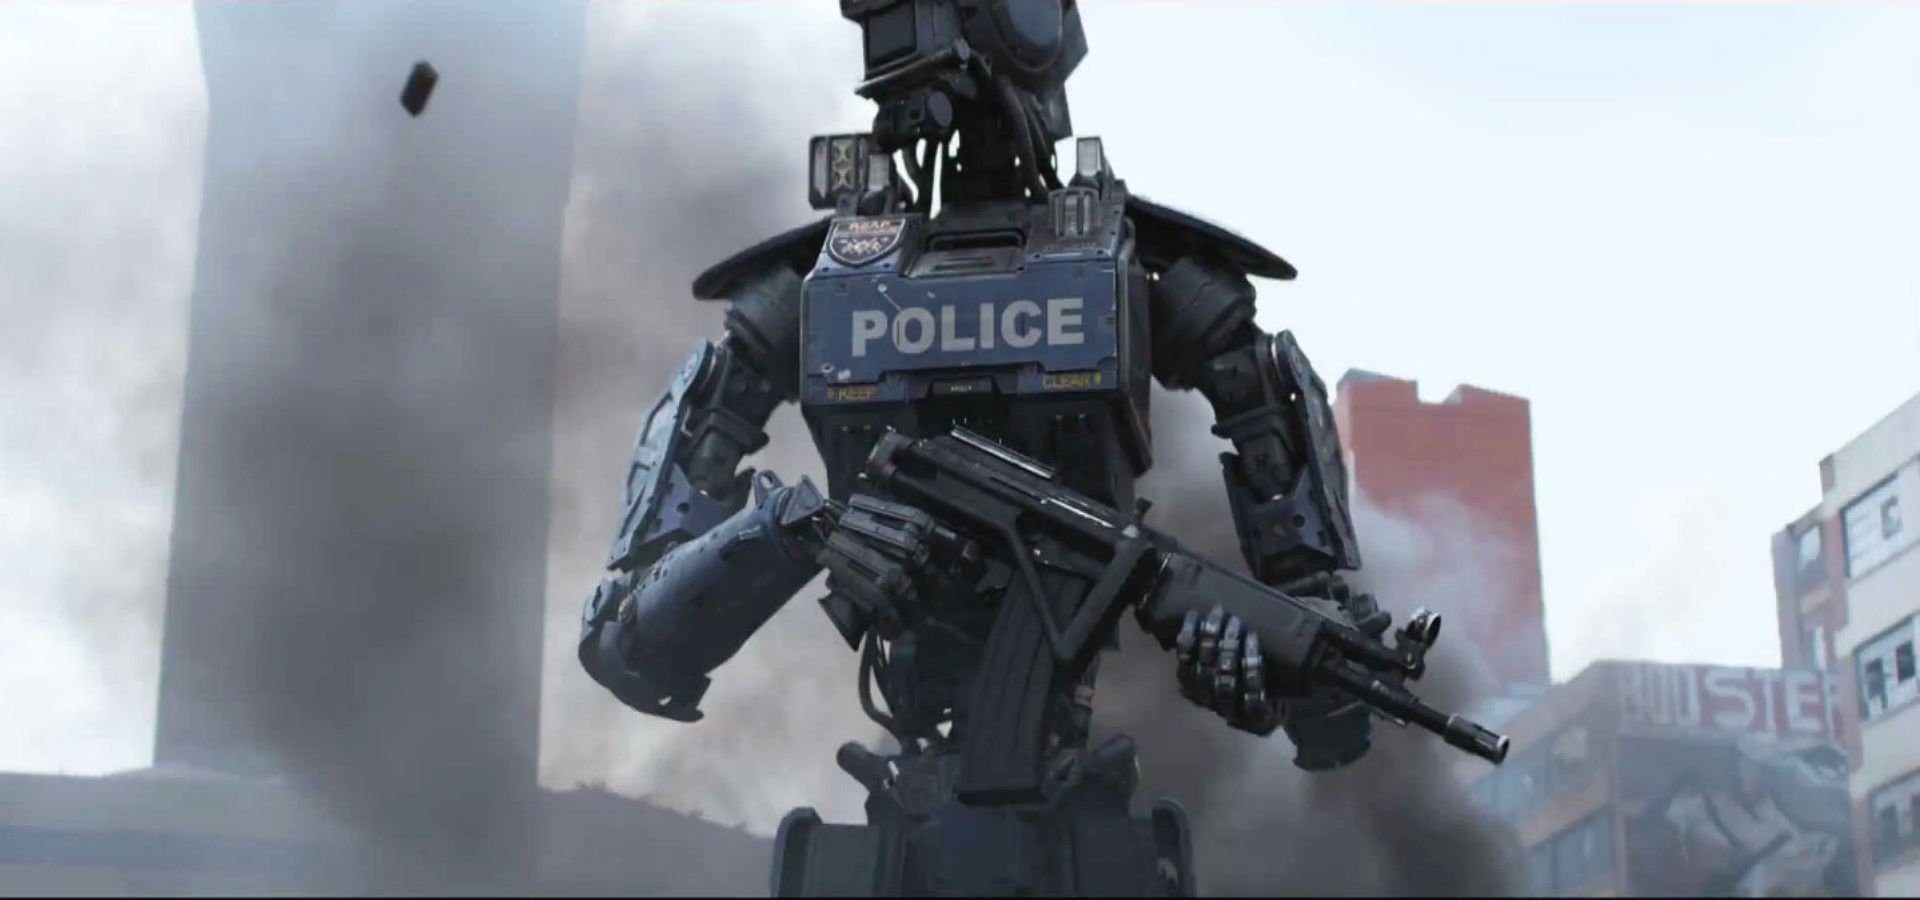 chappie, Sci fi, Futuristic, Action, Thriller, Robot, Cyborg, Action, 1chappie Wallpaper